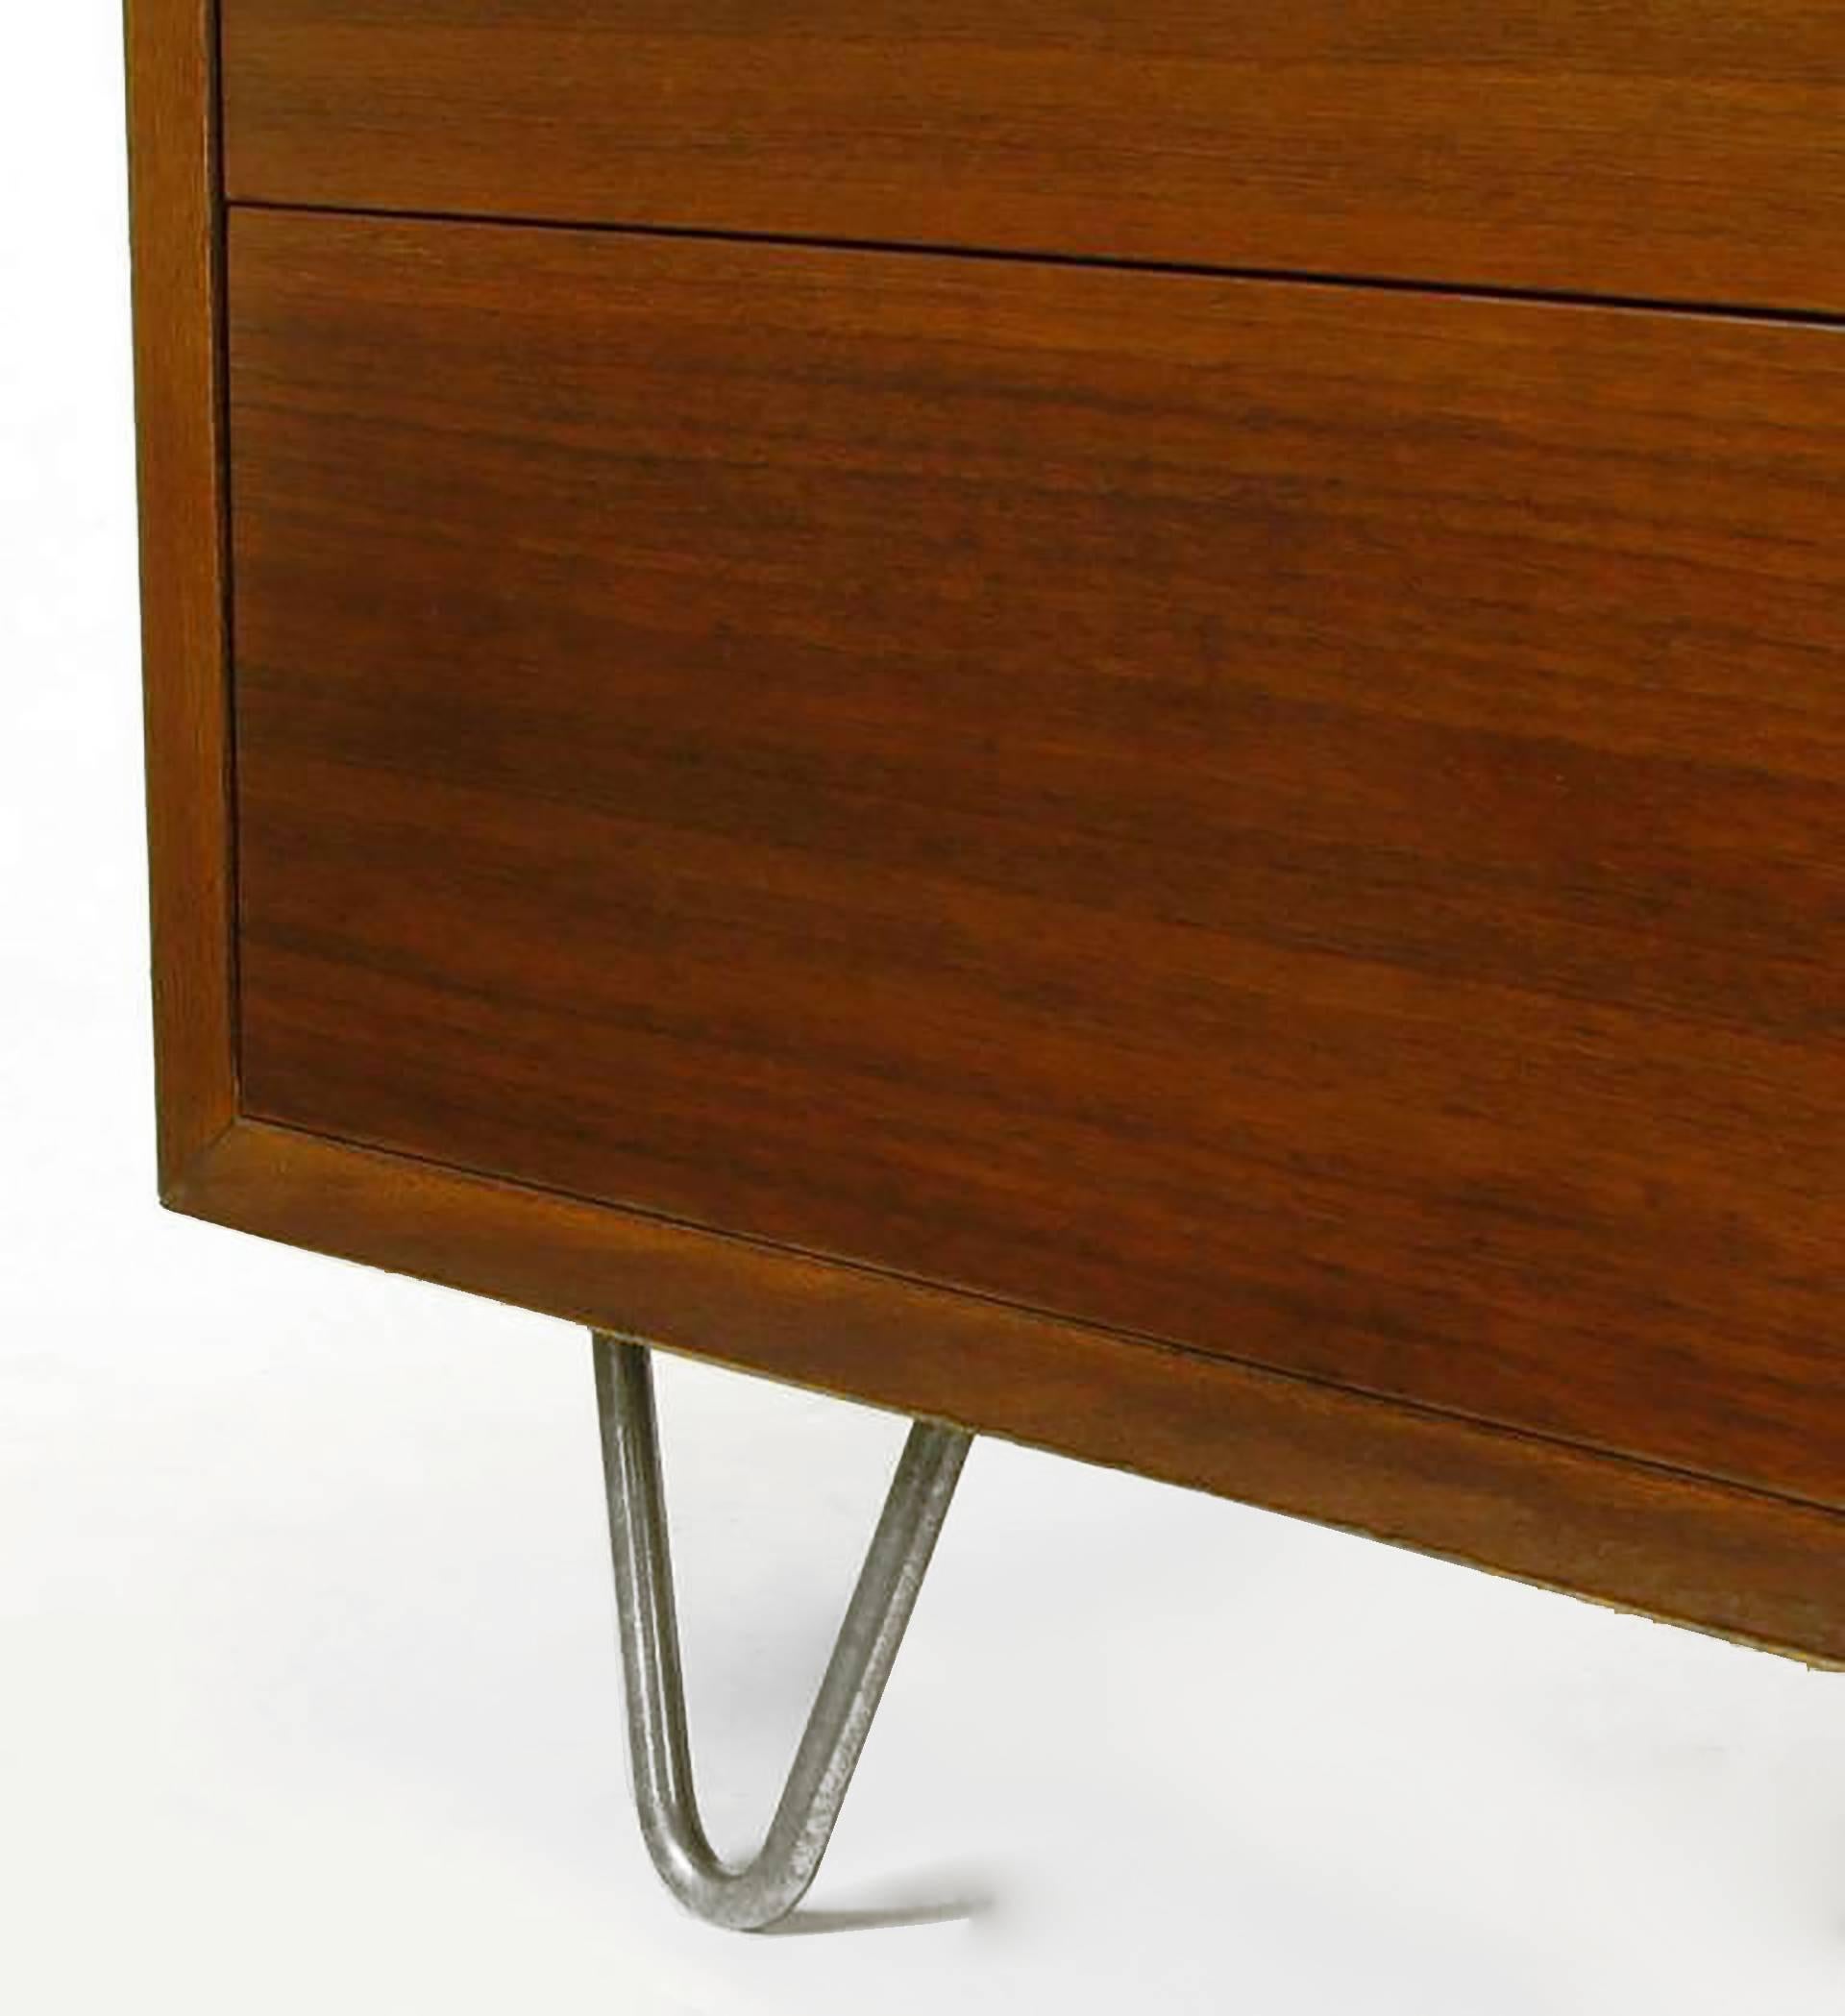 Mid-20th Century Five-Drawer Ribbon Mahogany Tall Dresser by George Nelson for Herman Miller For Sale